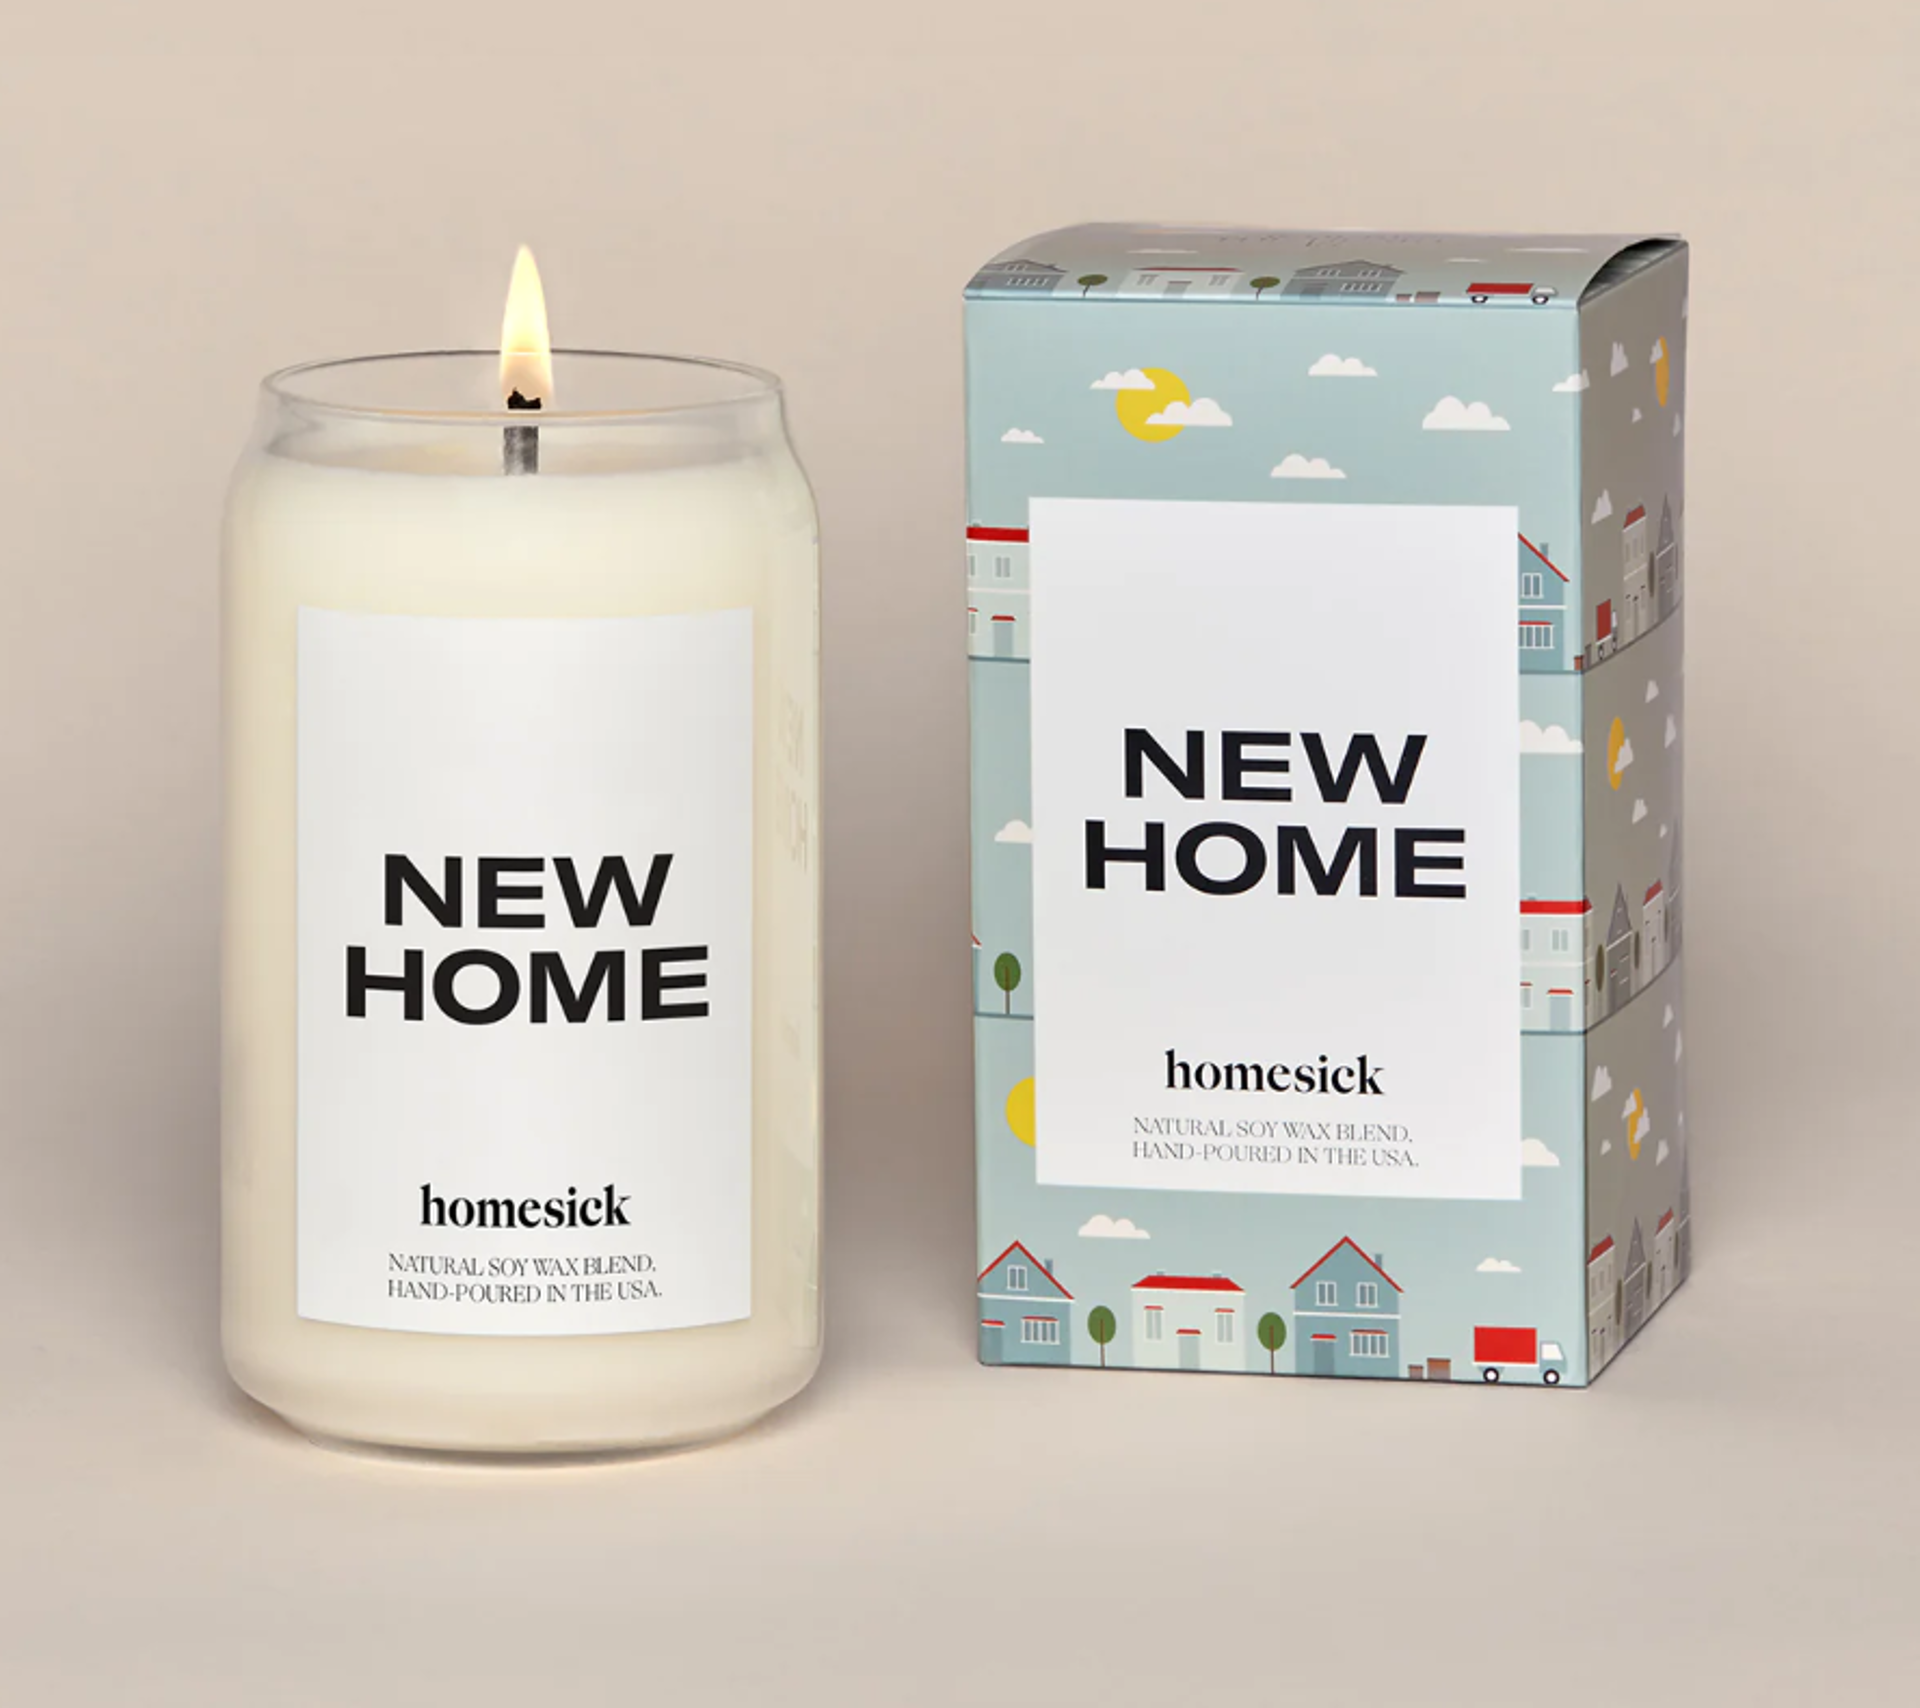 New Home Candle by Chauvet Arts